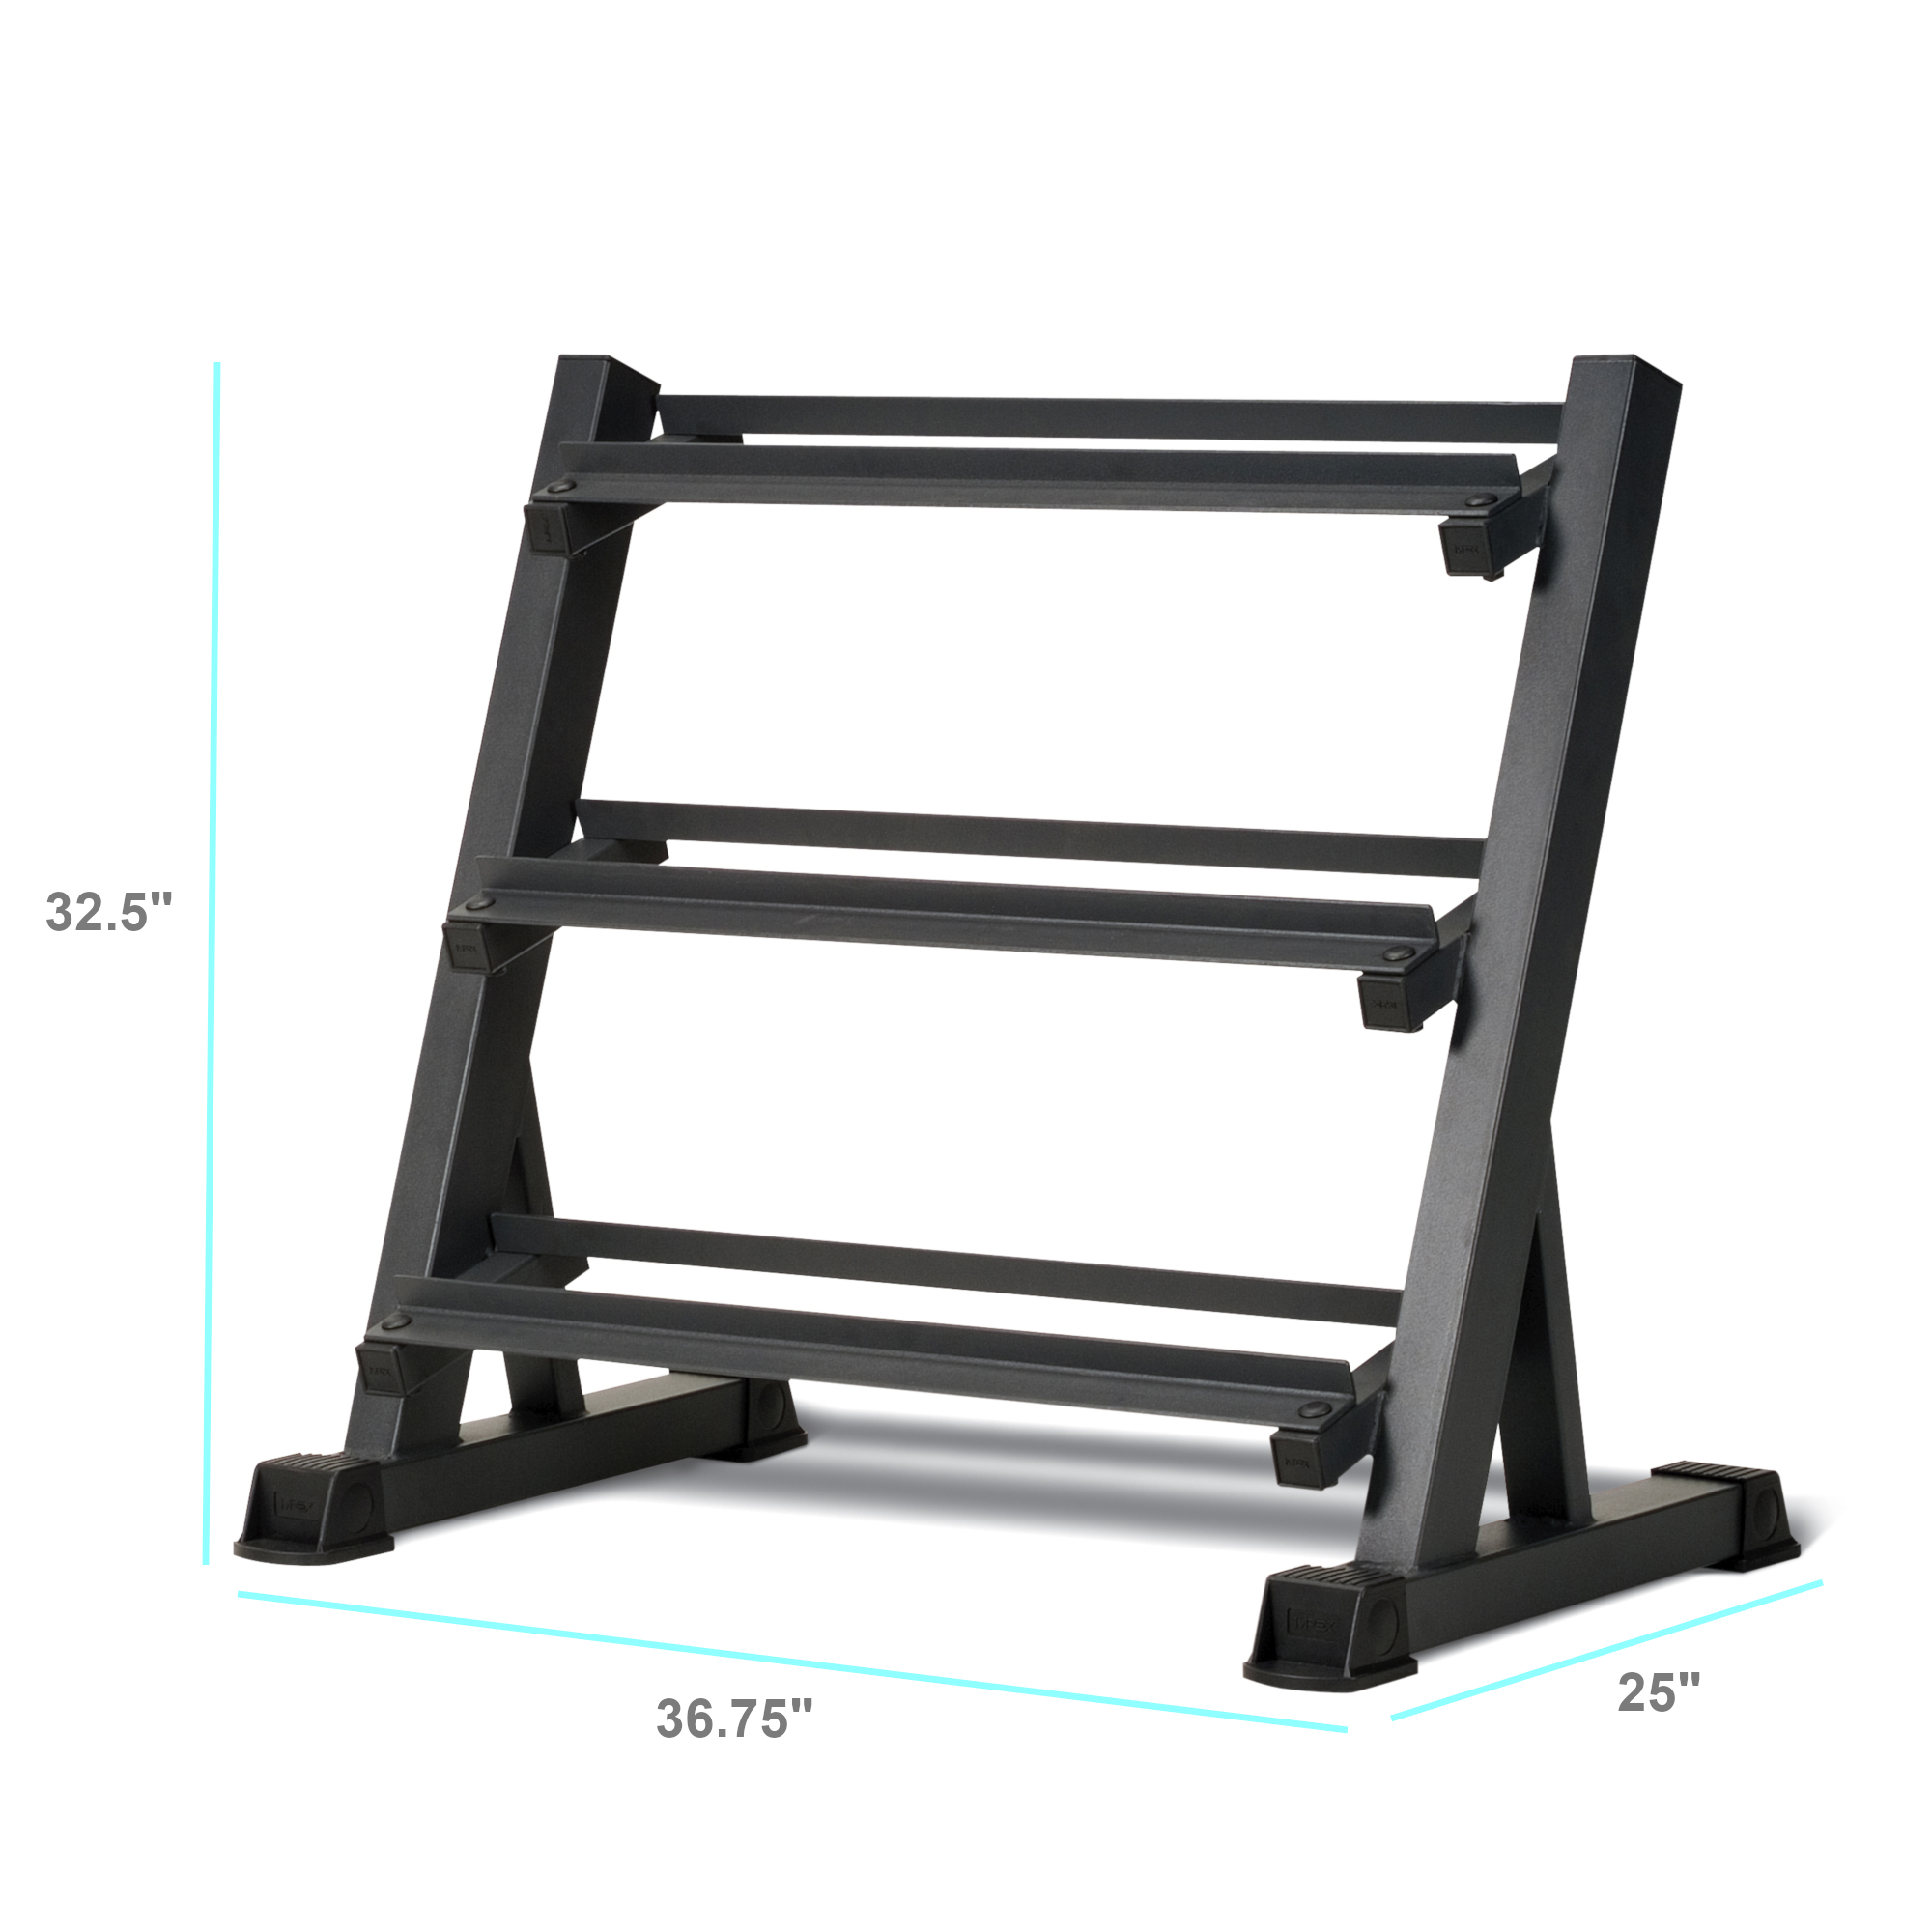 Marcy Apex 3-Tier Dumbbell Rack: DBR-86 - image 4 of 4